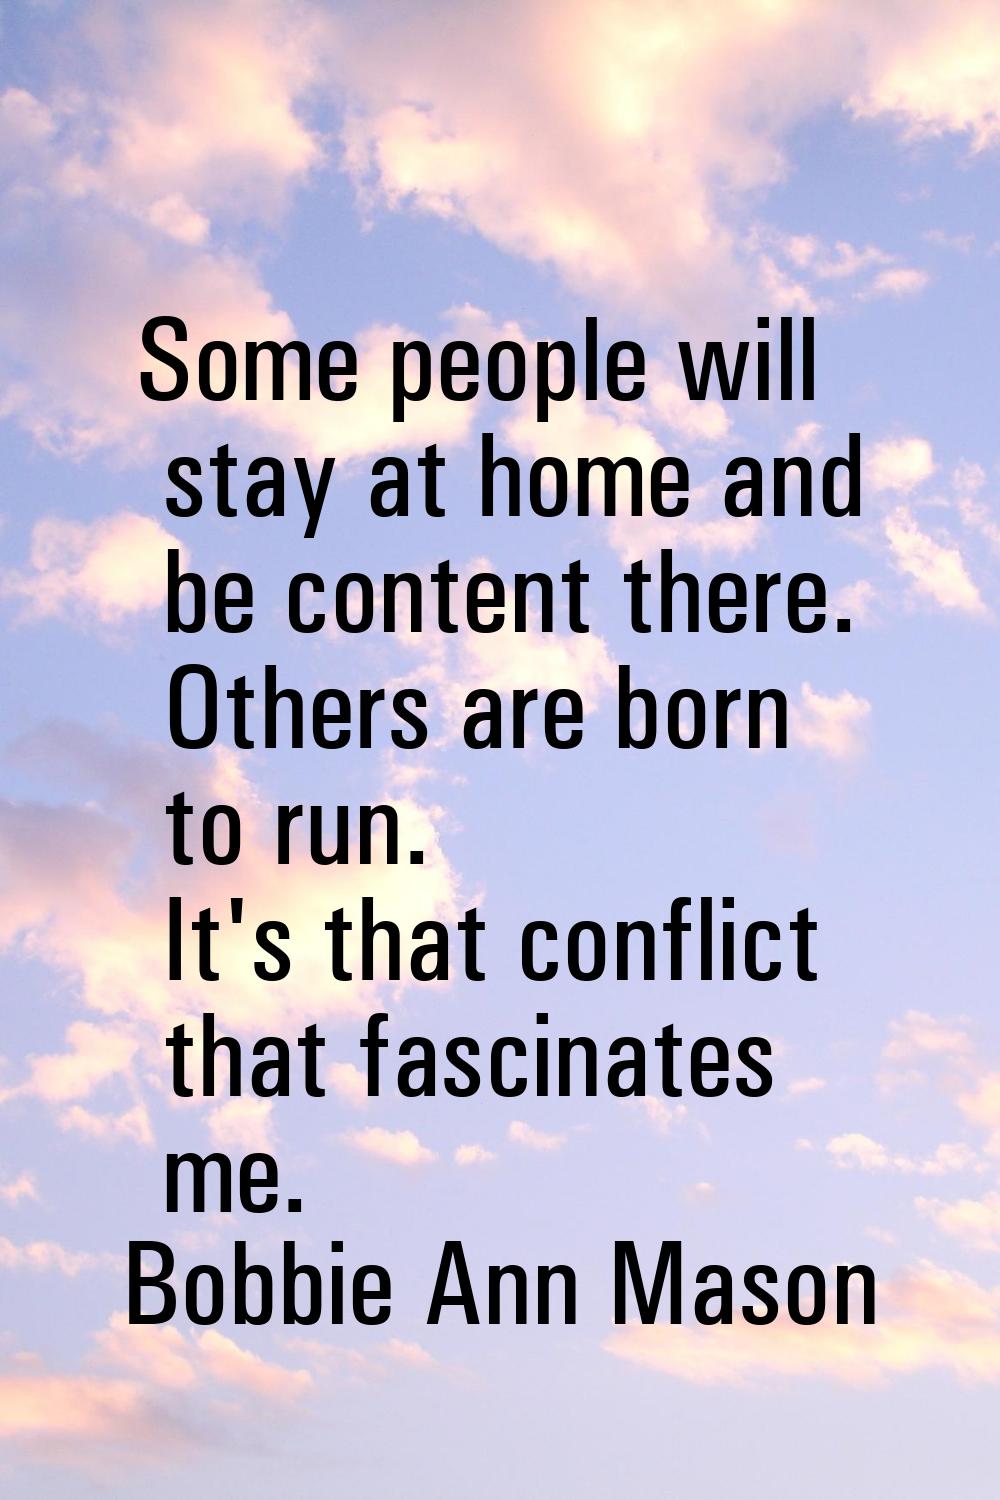 Some people will stay at home and be content there. Others are born to run. It's that conflict that